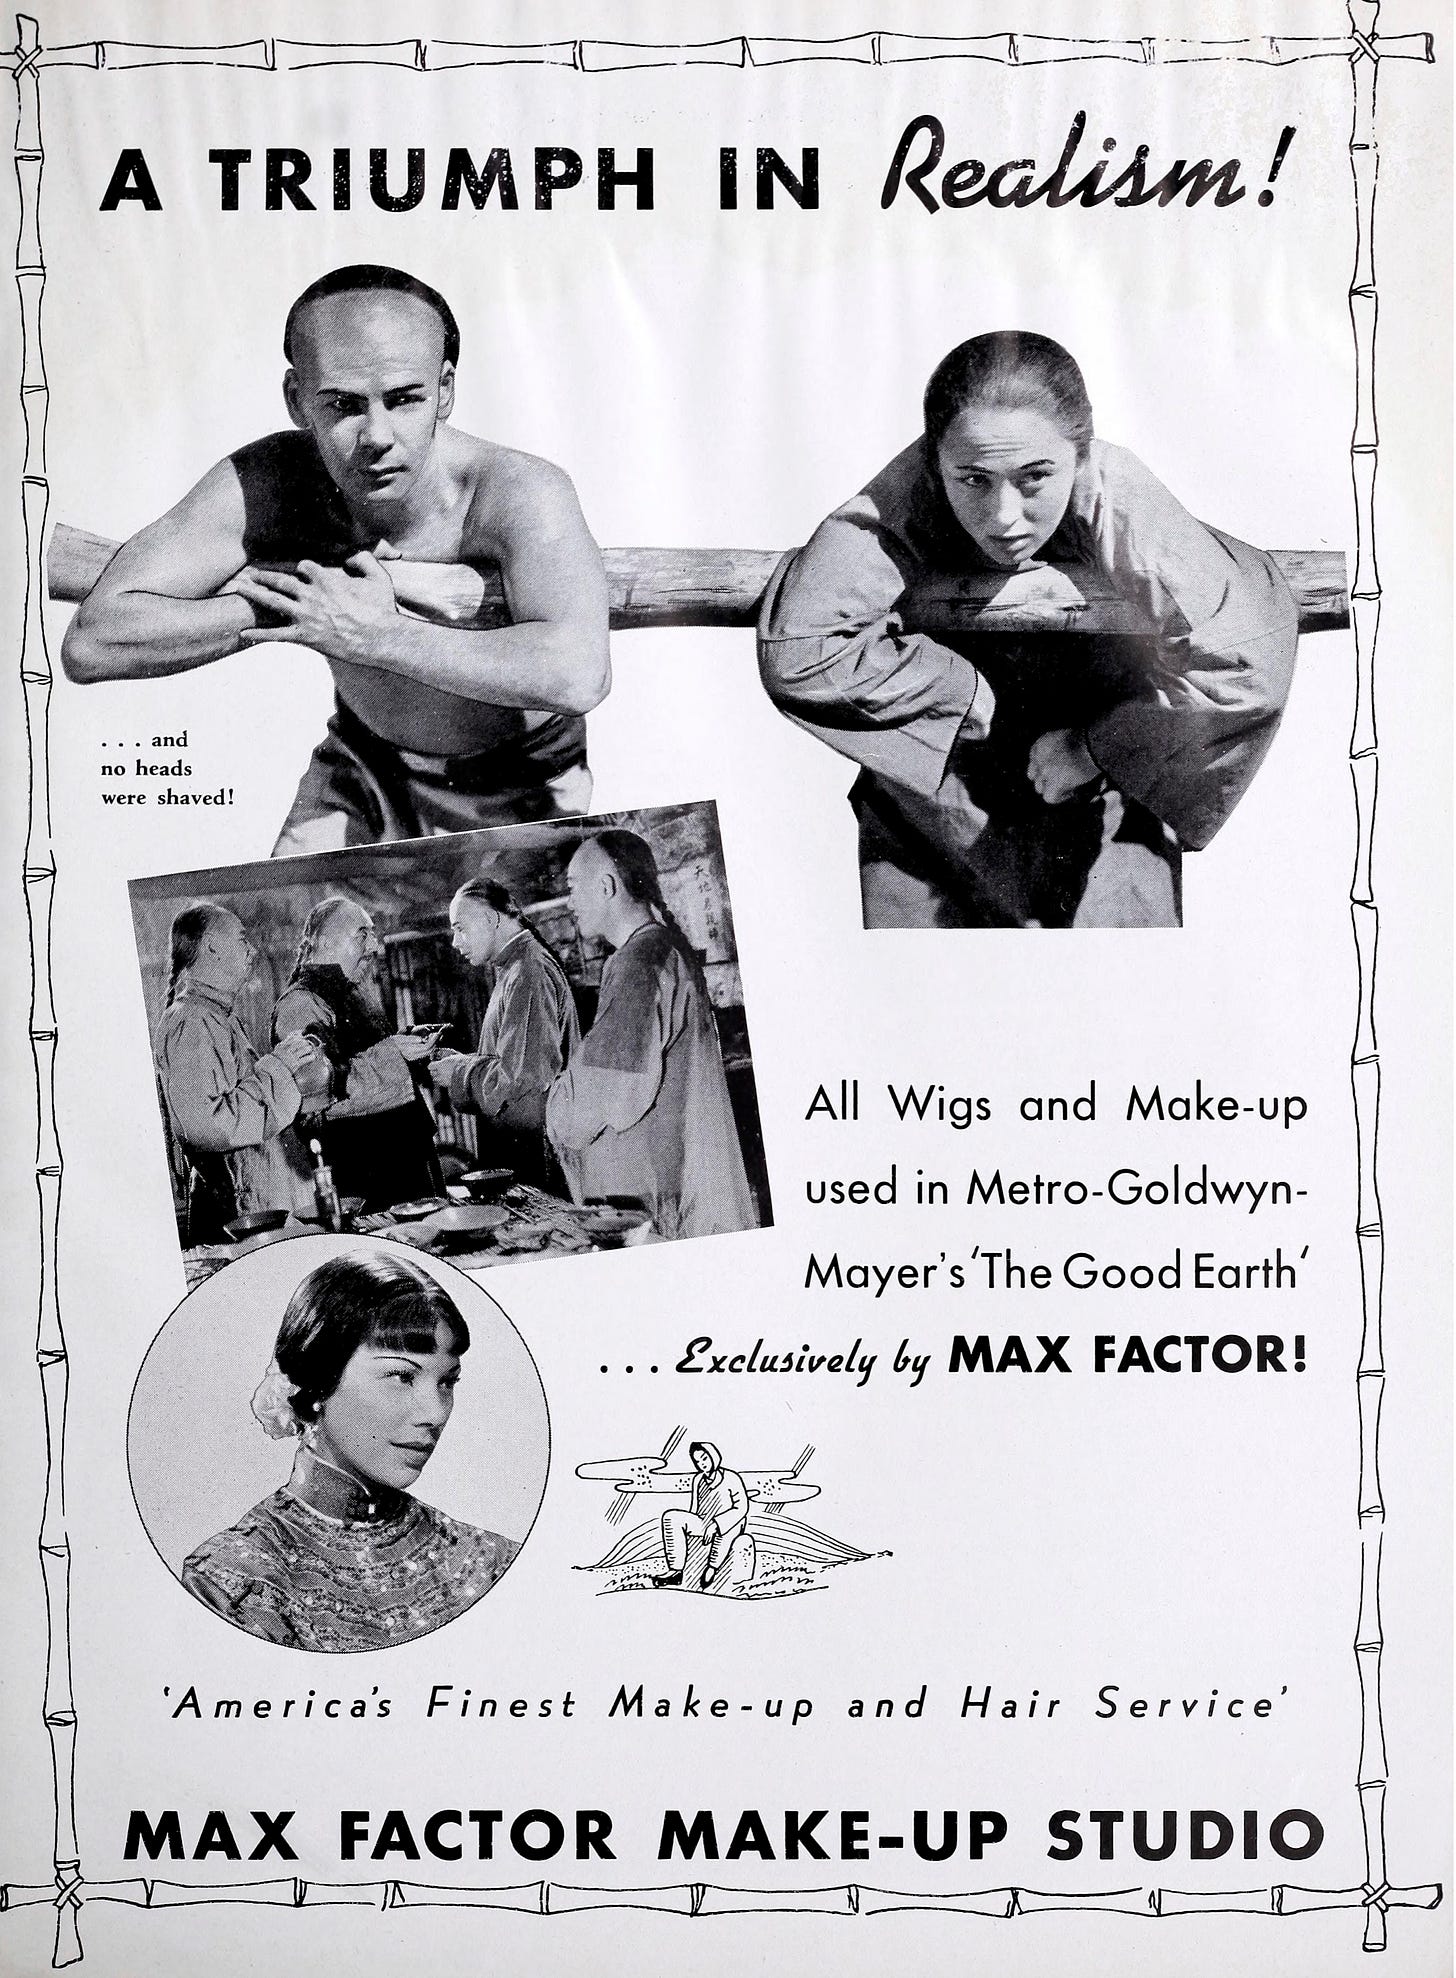 ad includes images of Paul Muni, Luise Rainer, and other actors from The Good Earth in yellowface makeup with the headline "A Triumph in Realism!"